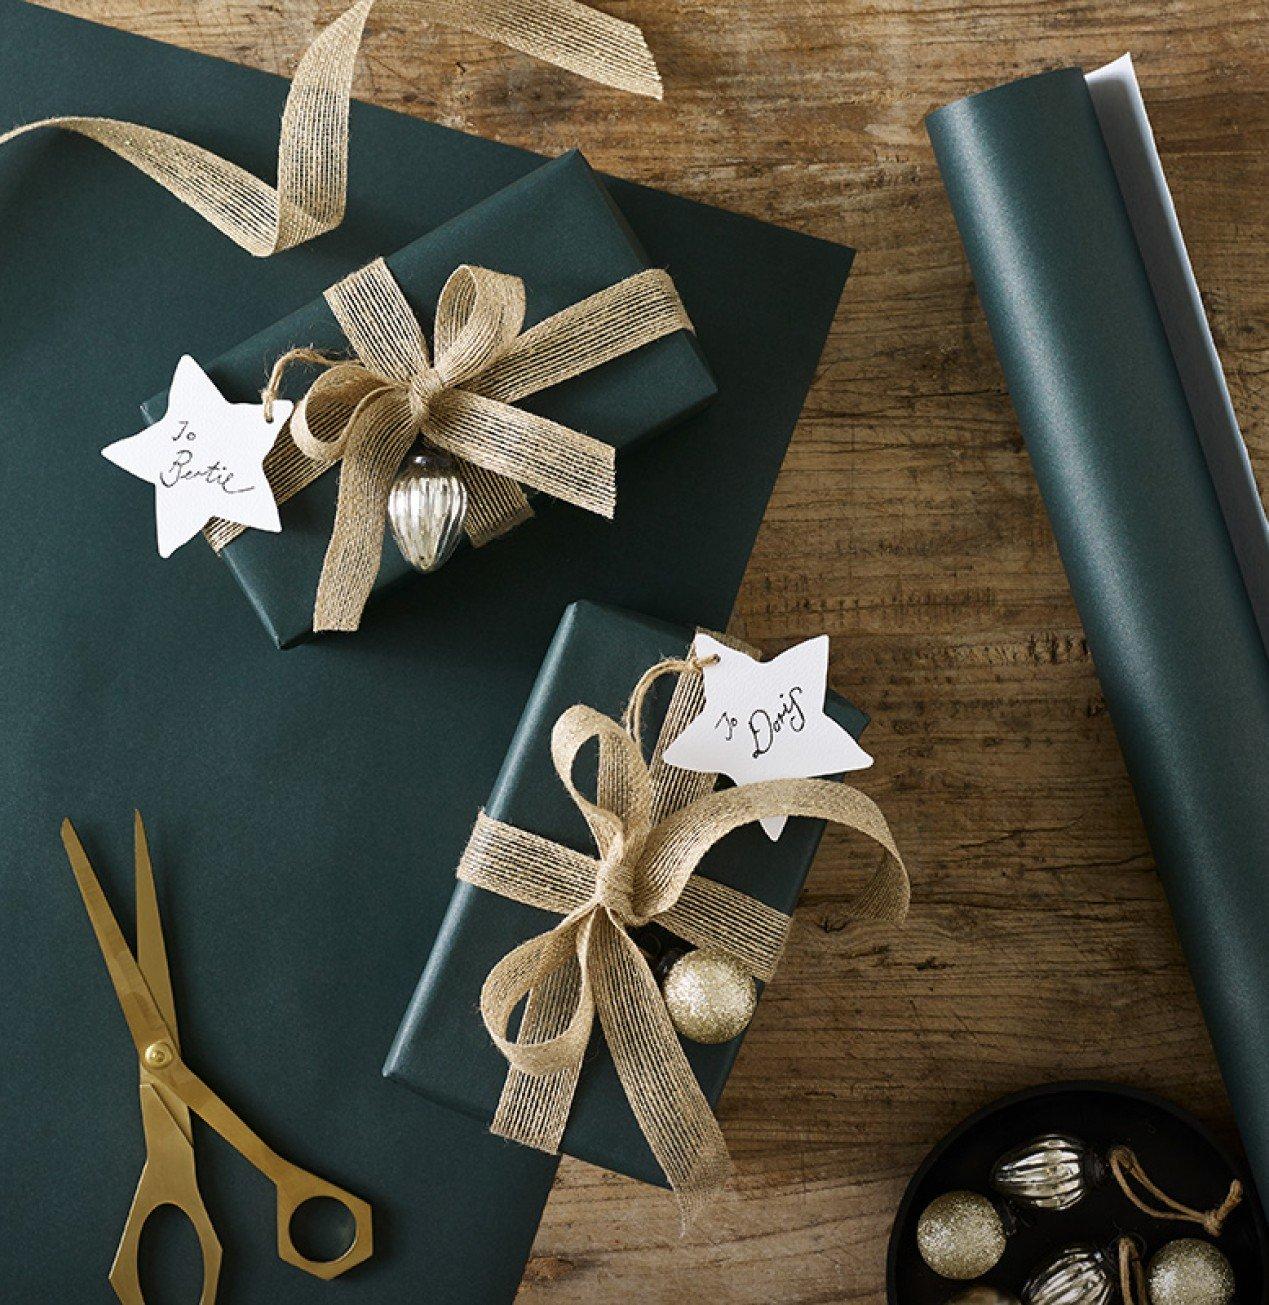 Christmas Wrapping Paper, Luxury Rose Gold Gift Wrap, Tag & Ribbons UK